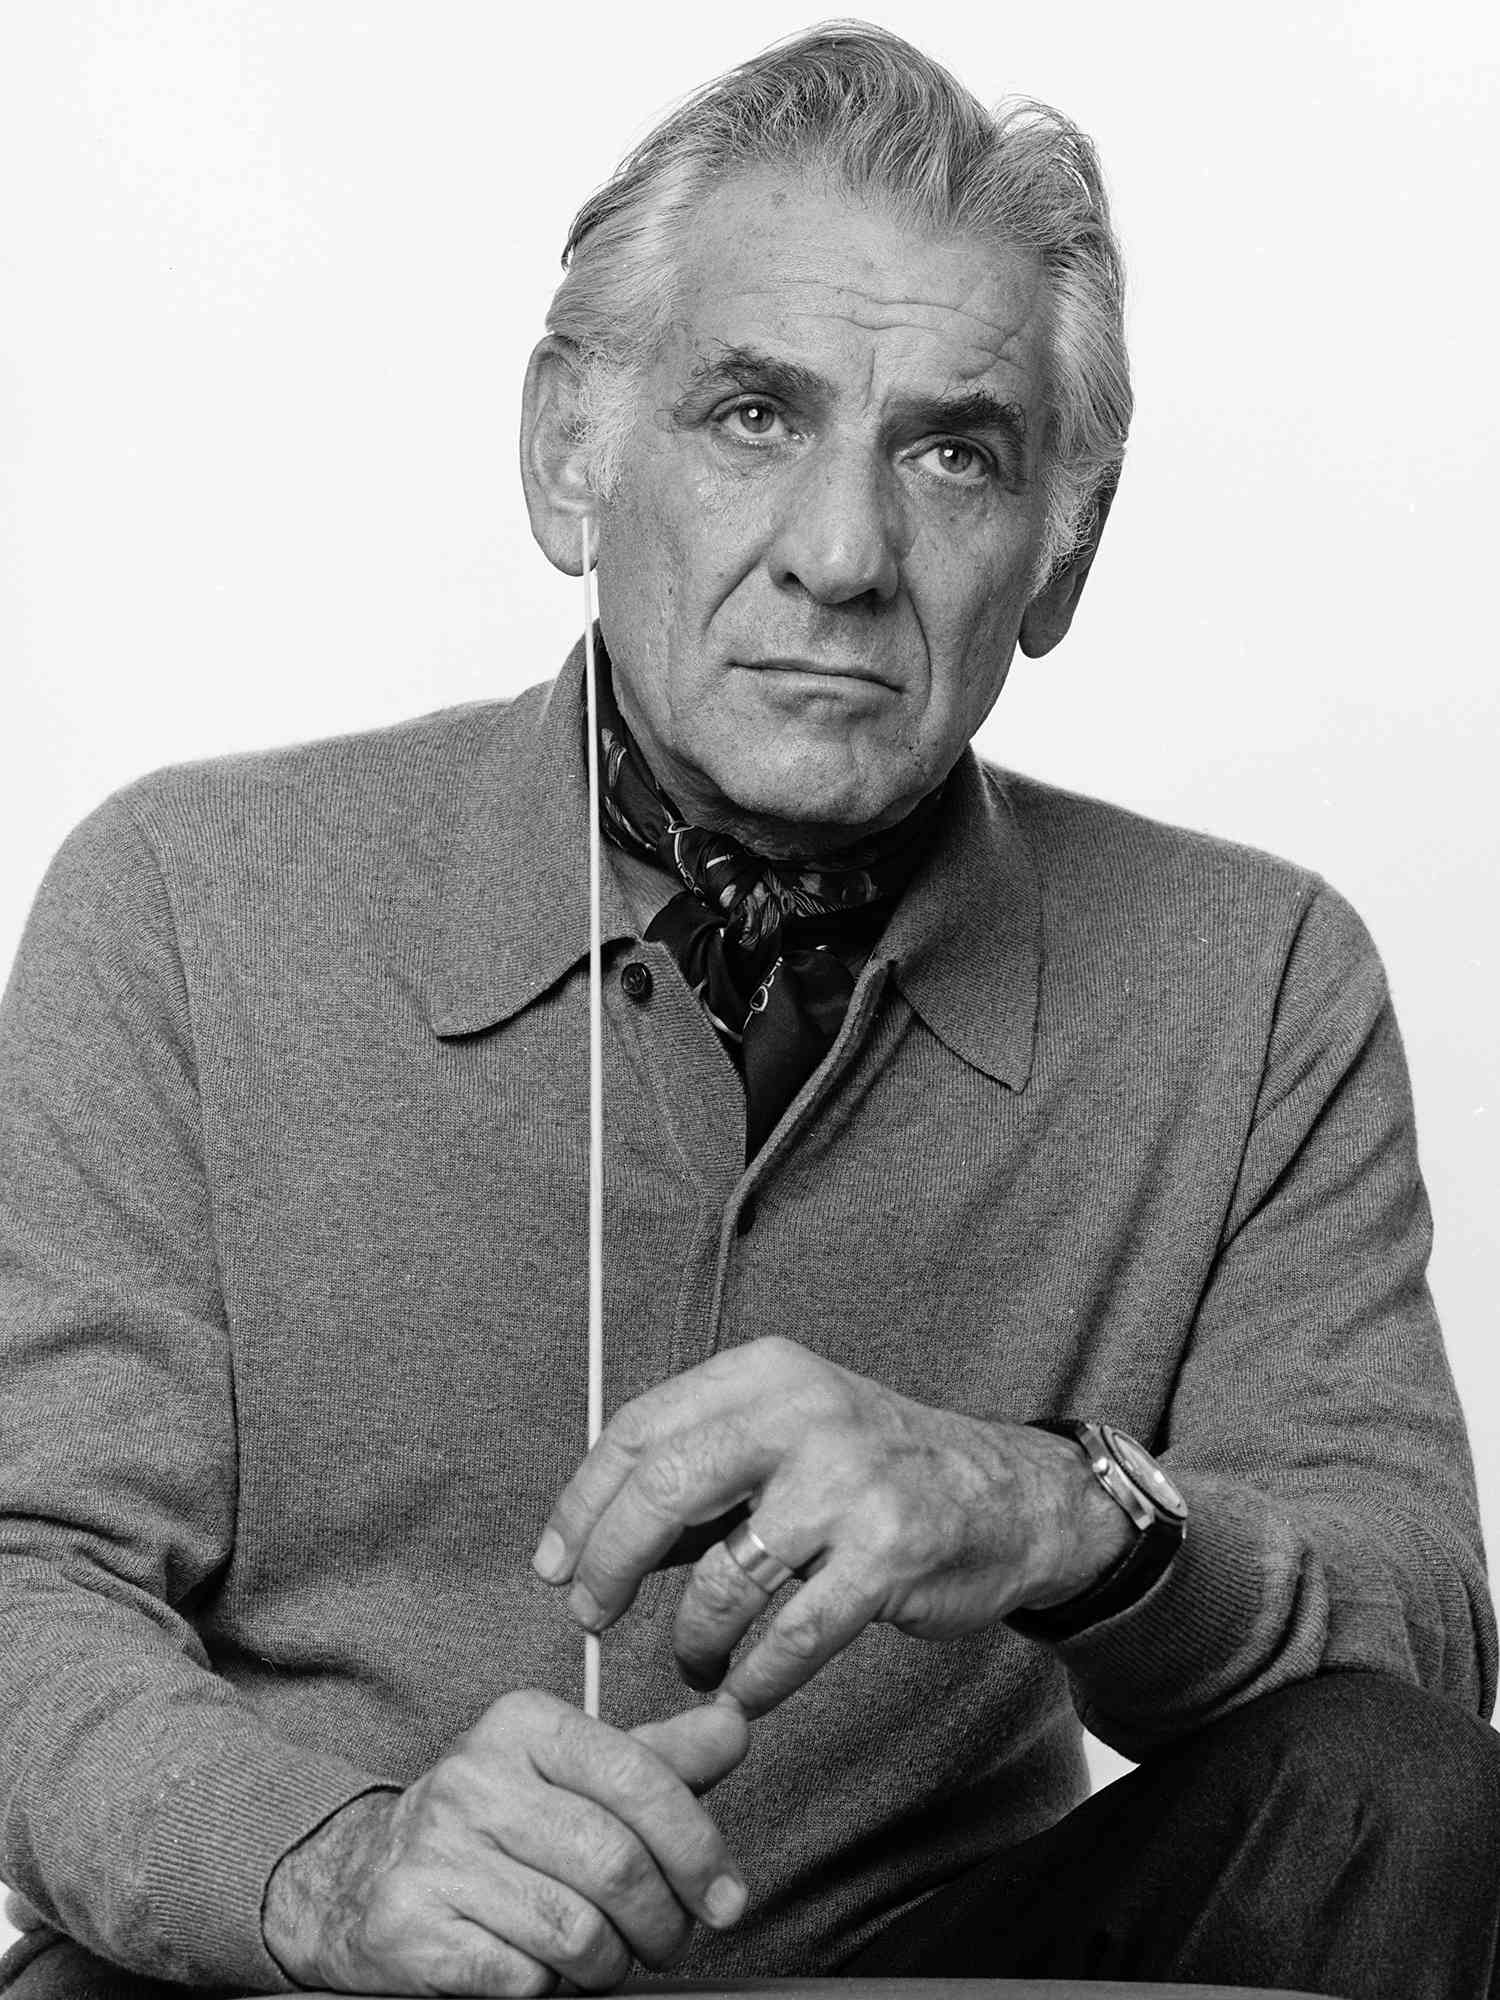 Was Leonard Bernstein Gay Or Bisexual? Did His Wife Know His Sexuality?  Daughter